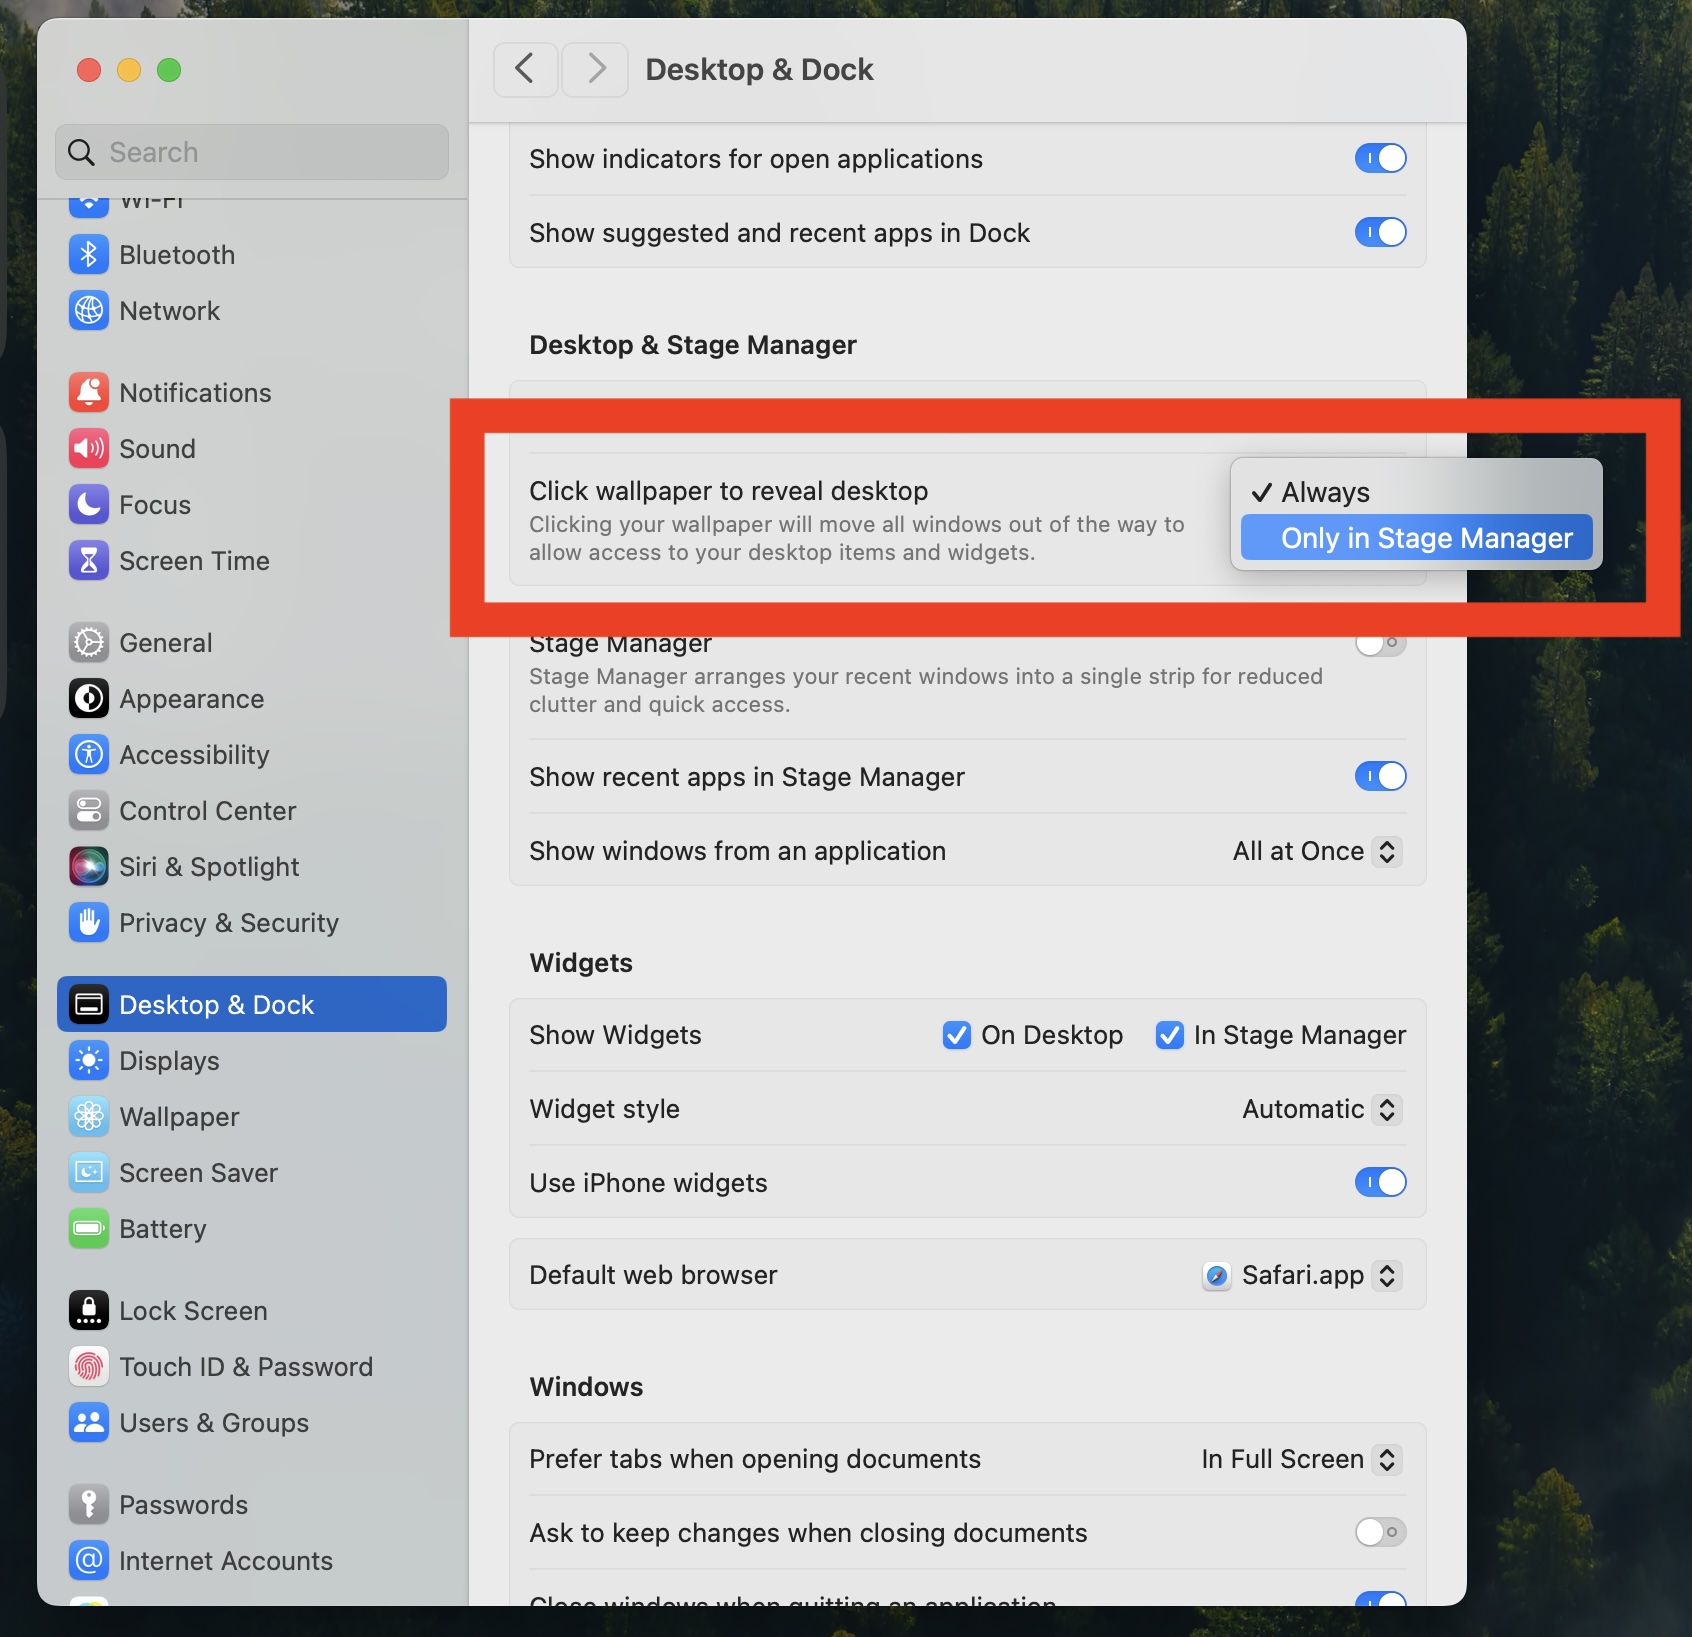 How to Disable “Click Wallpaper to Show Desktop” in MacOS Sonoma